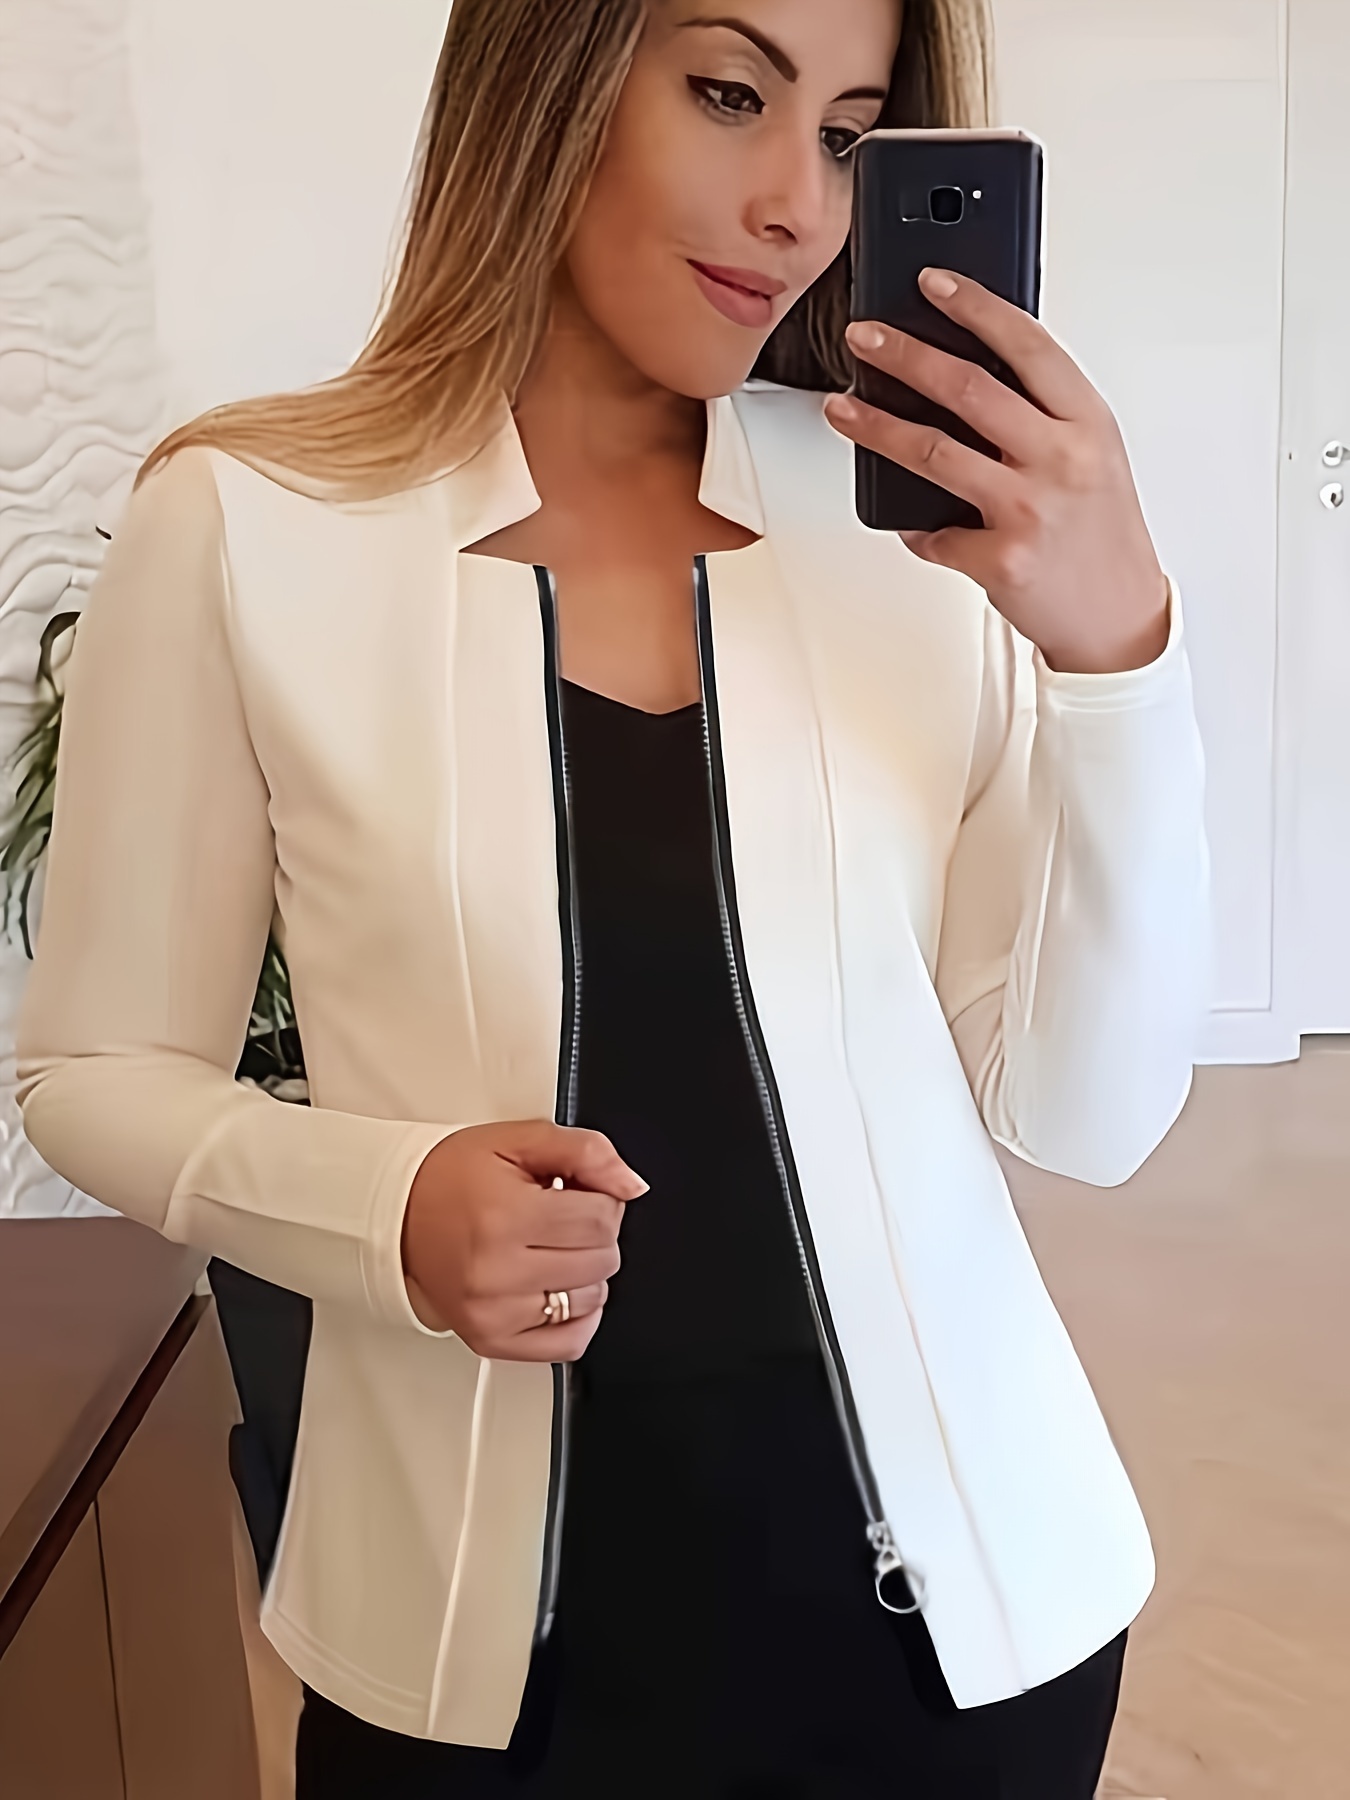 XFLWAM Womens Cropped Blazer Jacket Elegant Business Work Office Blazer  Casual Collarless Open Front Cardigan Suit Jackets with Zipper Pockets  White L